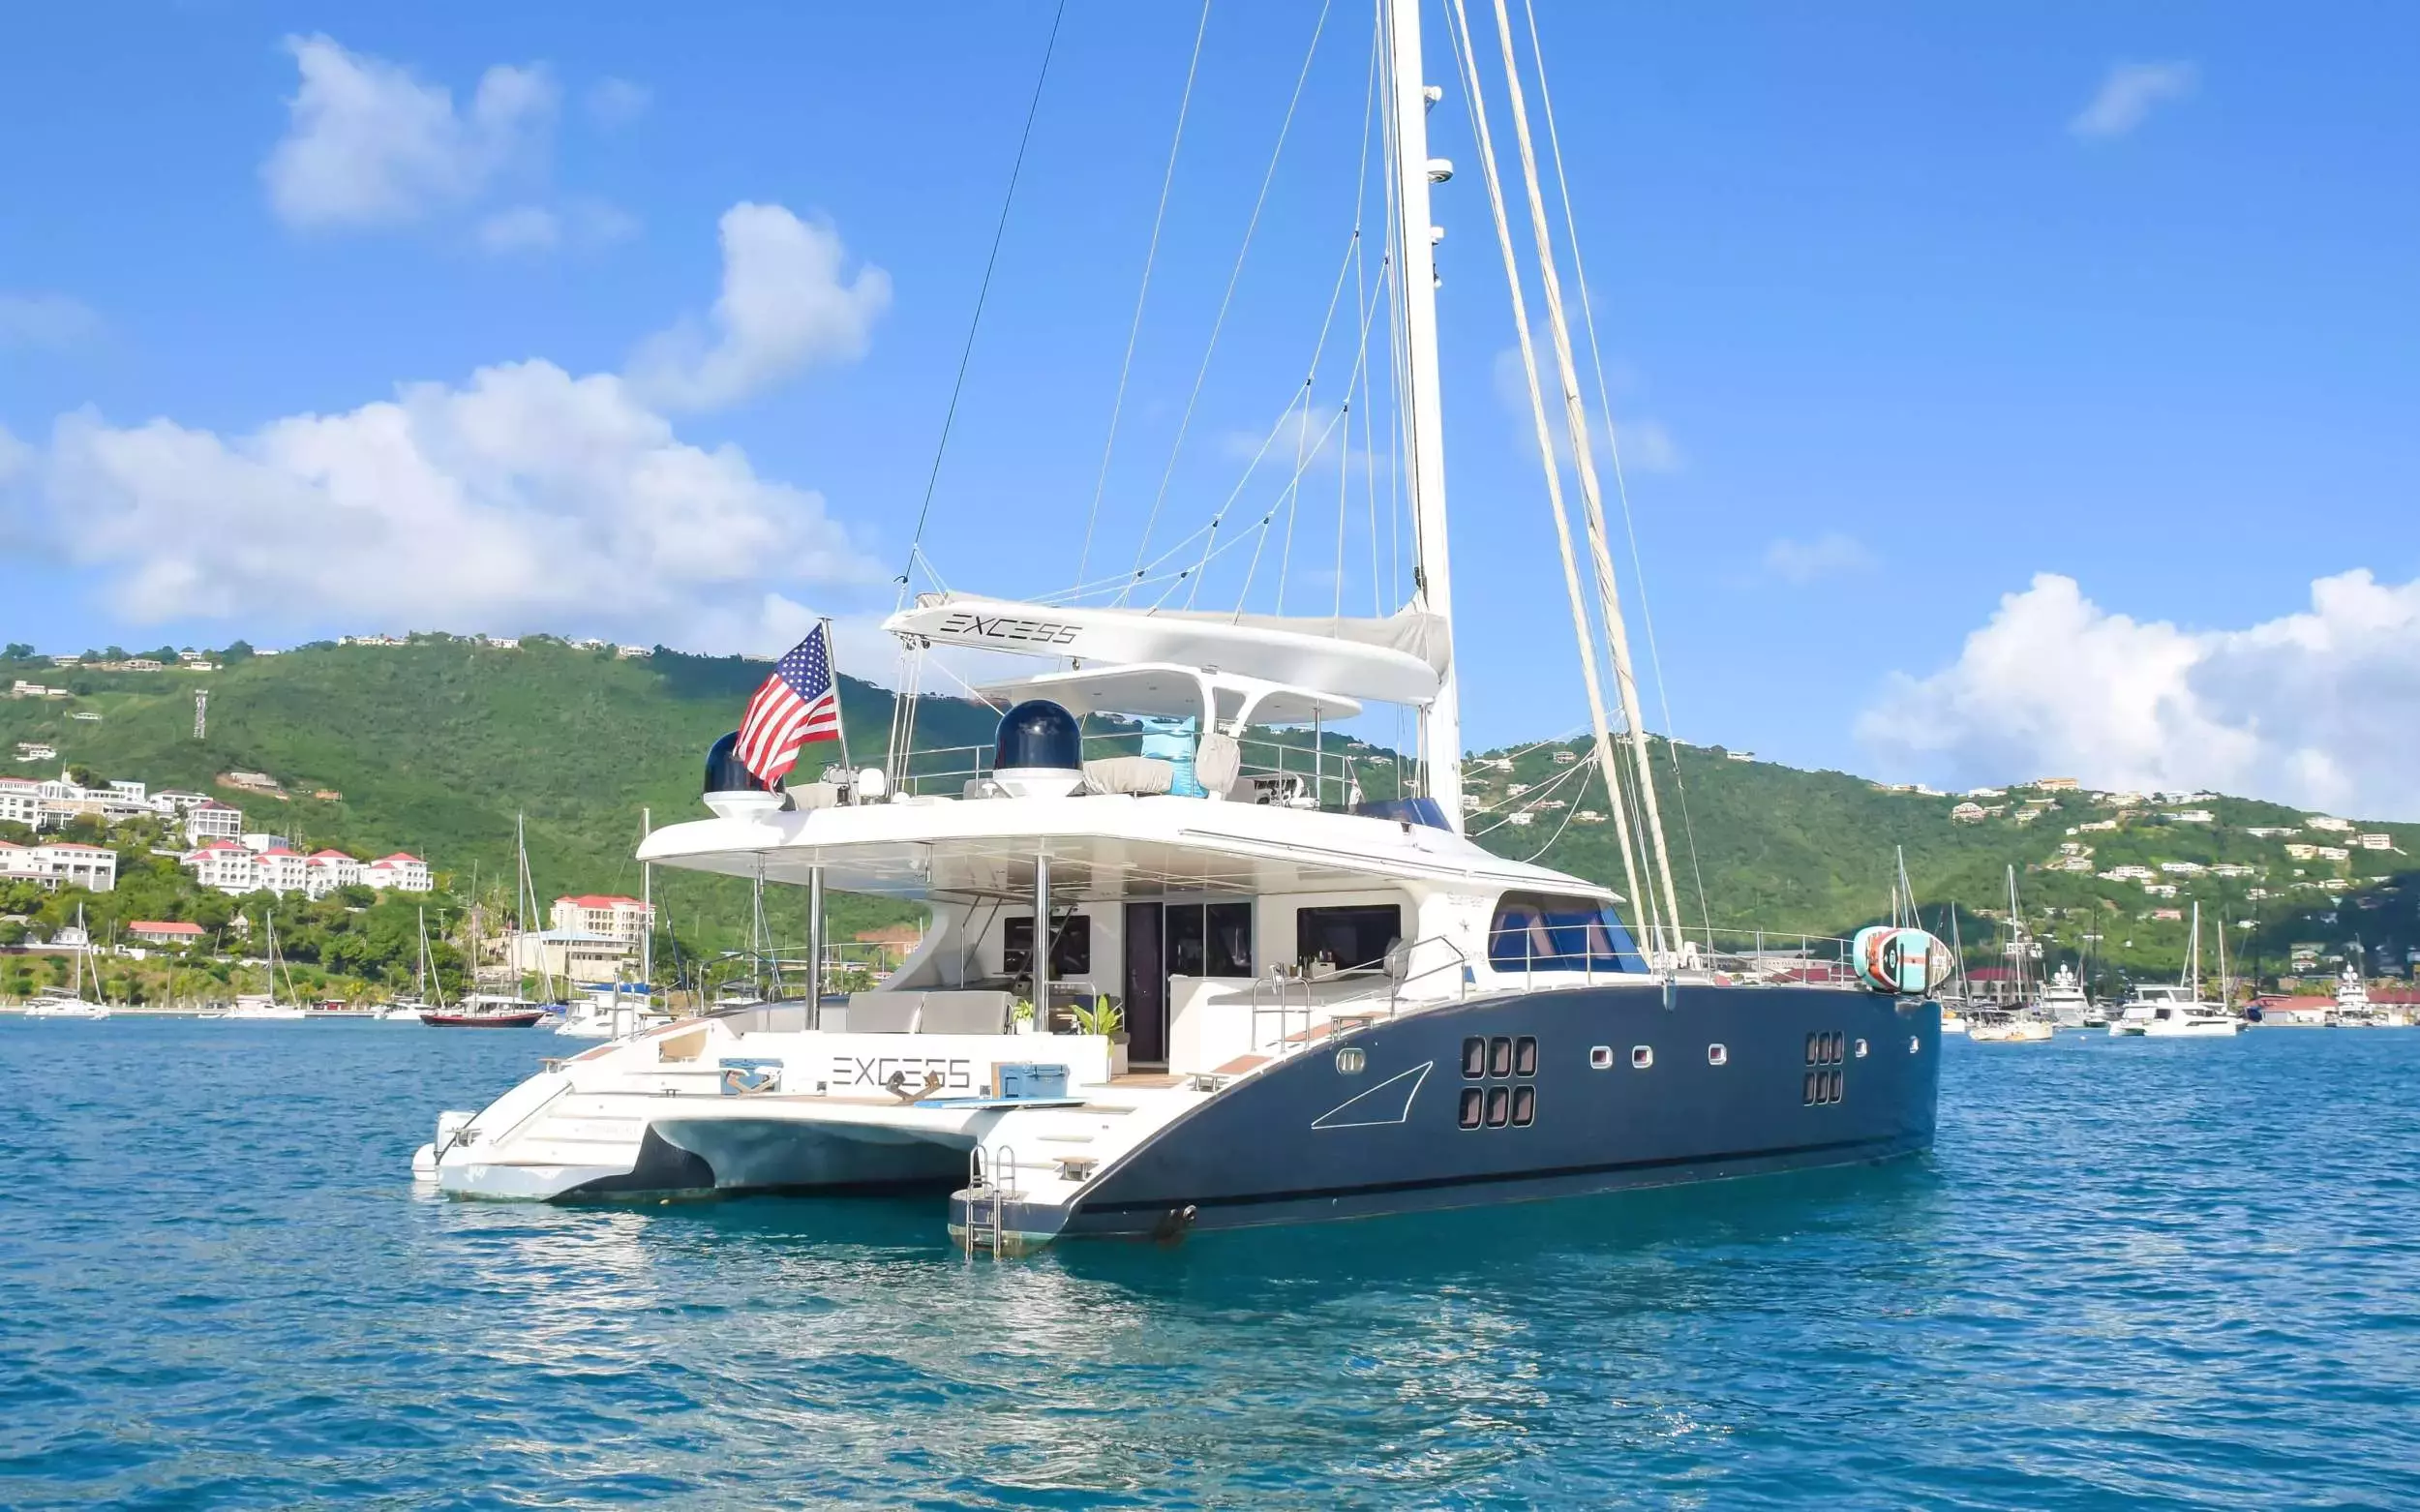 Excess by Sunreef Yachts - Top rates for a Rental of a private Luxury Catamaran in Puerto Rico